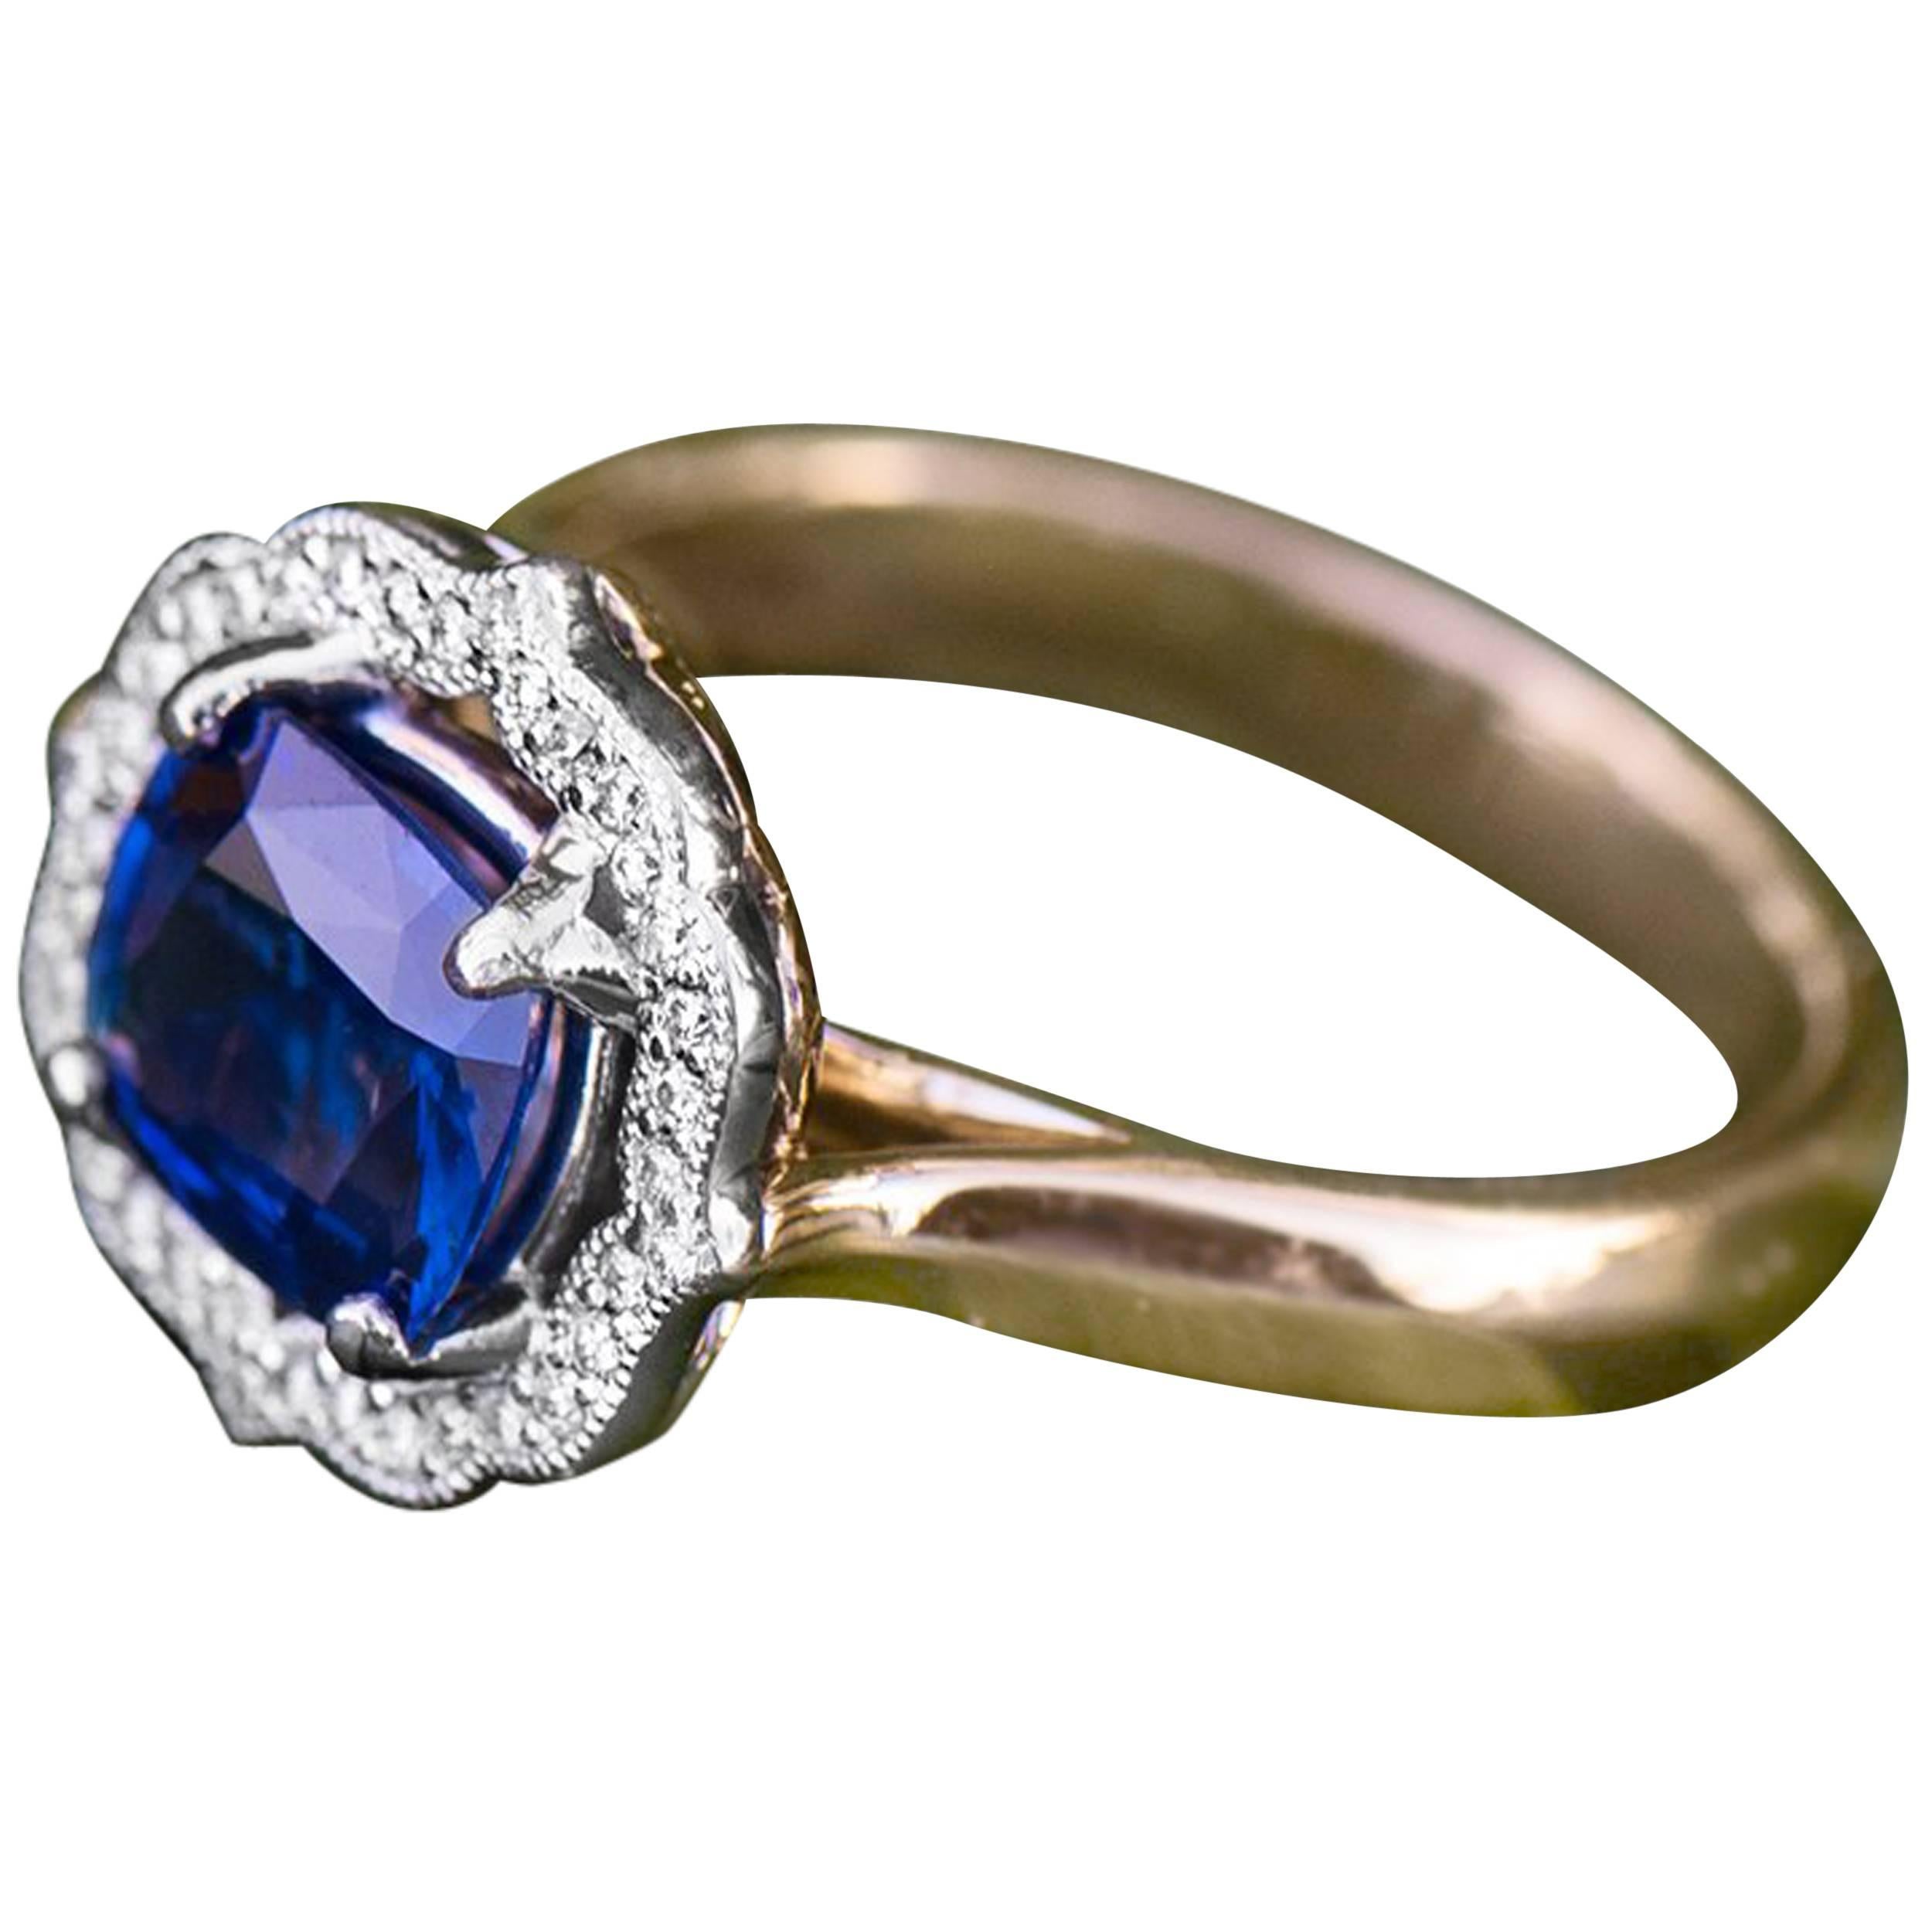 1.44 Carat Blue Sapphire and Diamond Ring in 14 Karat White and Yellow Gold